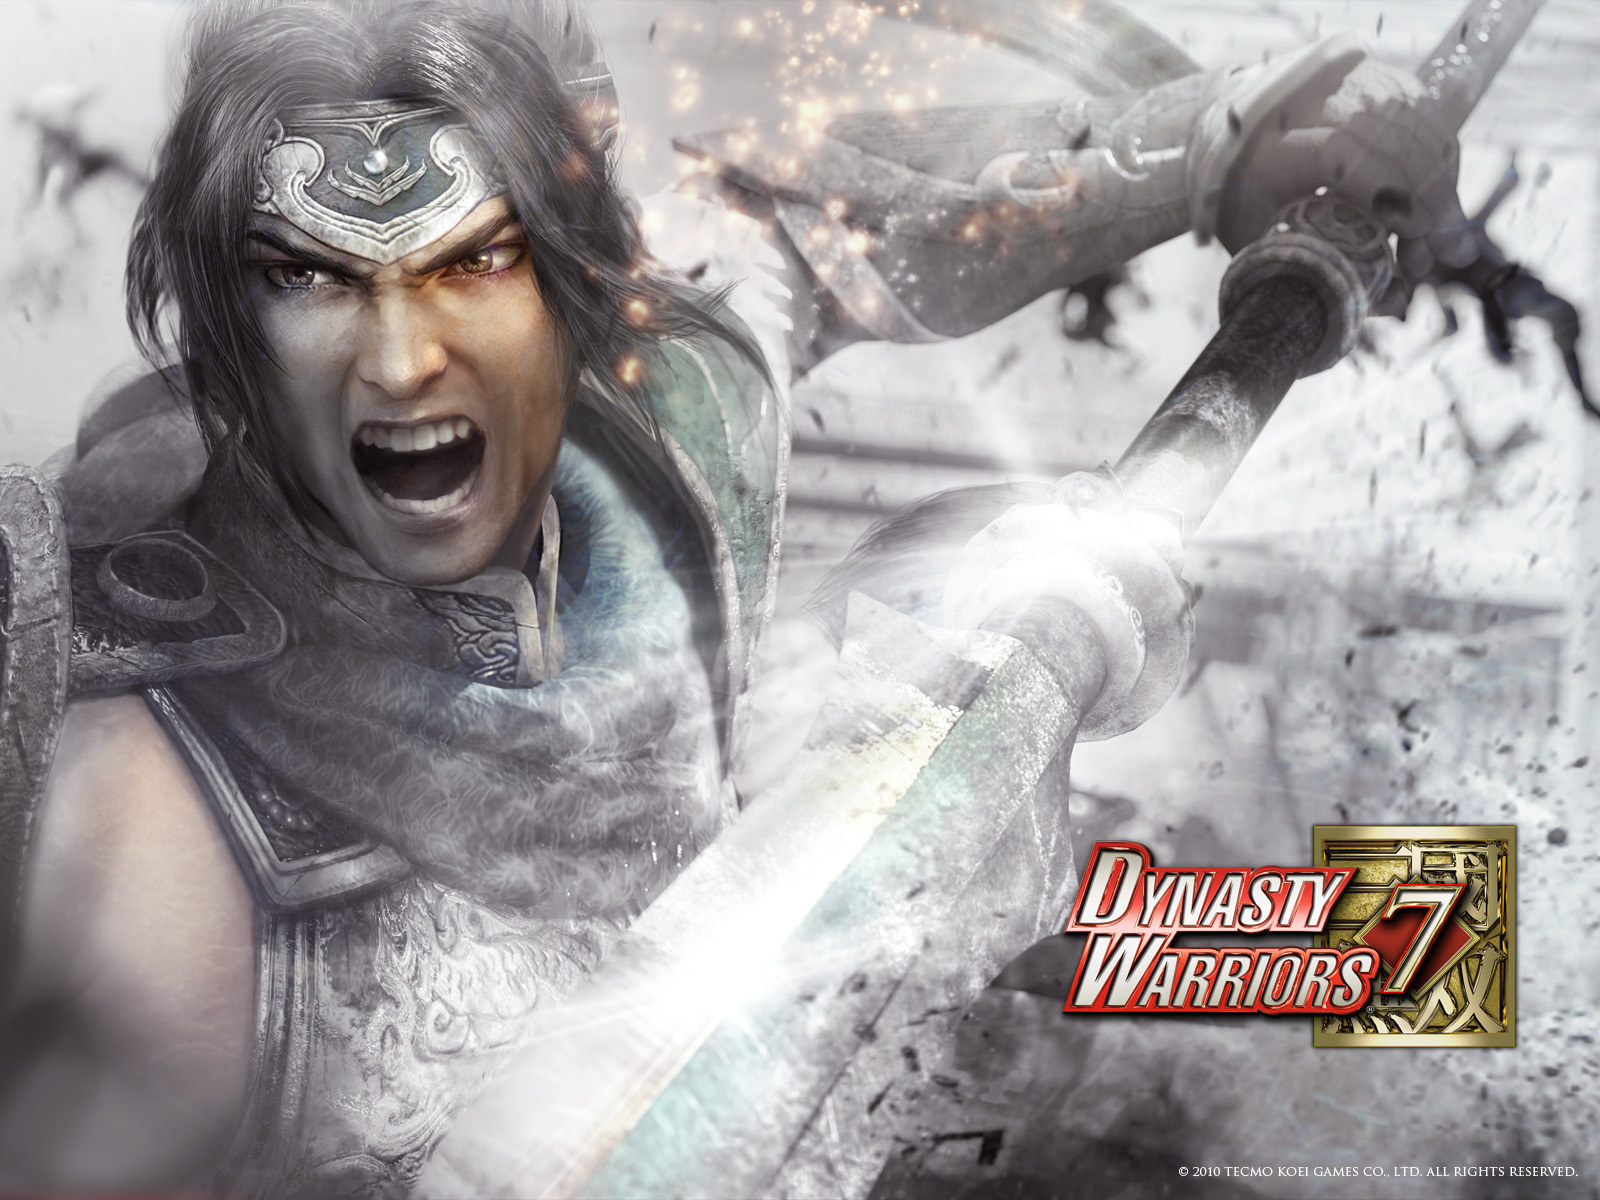 Warriors A Site For Koei Information Munity Every Warrior